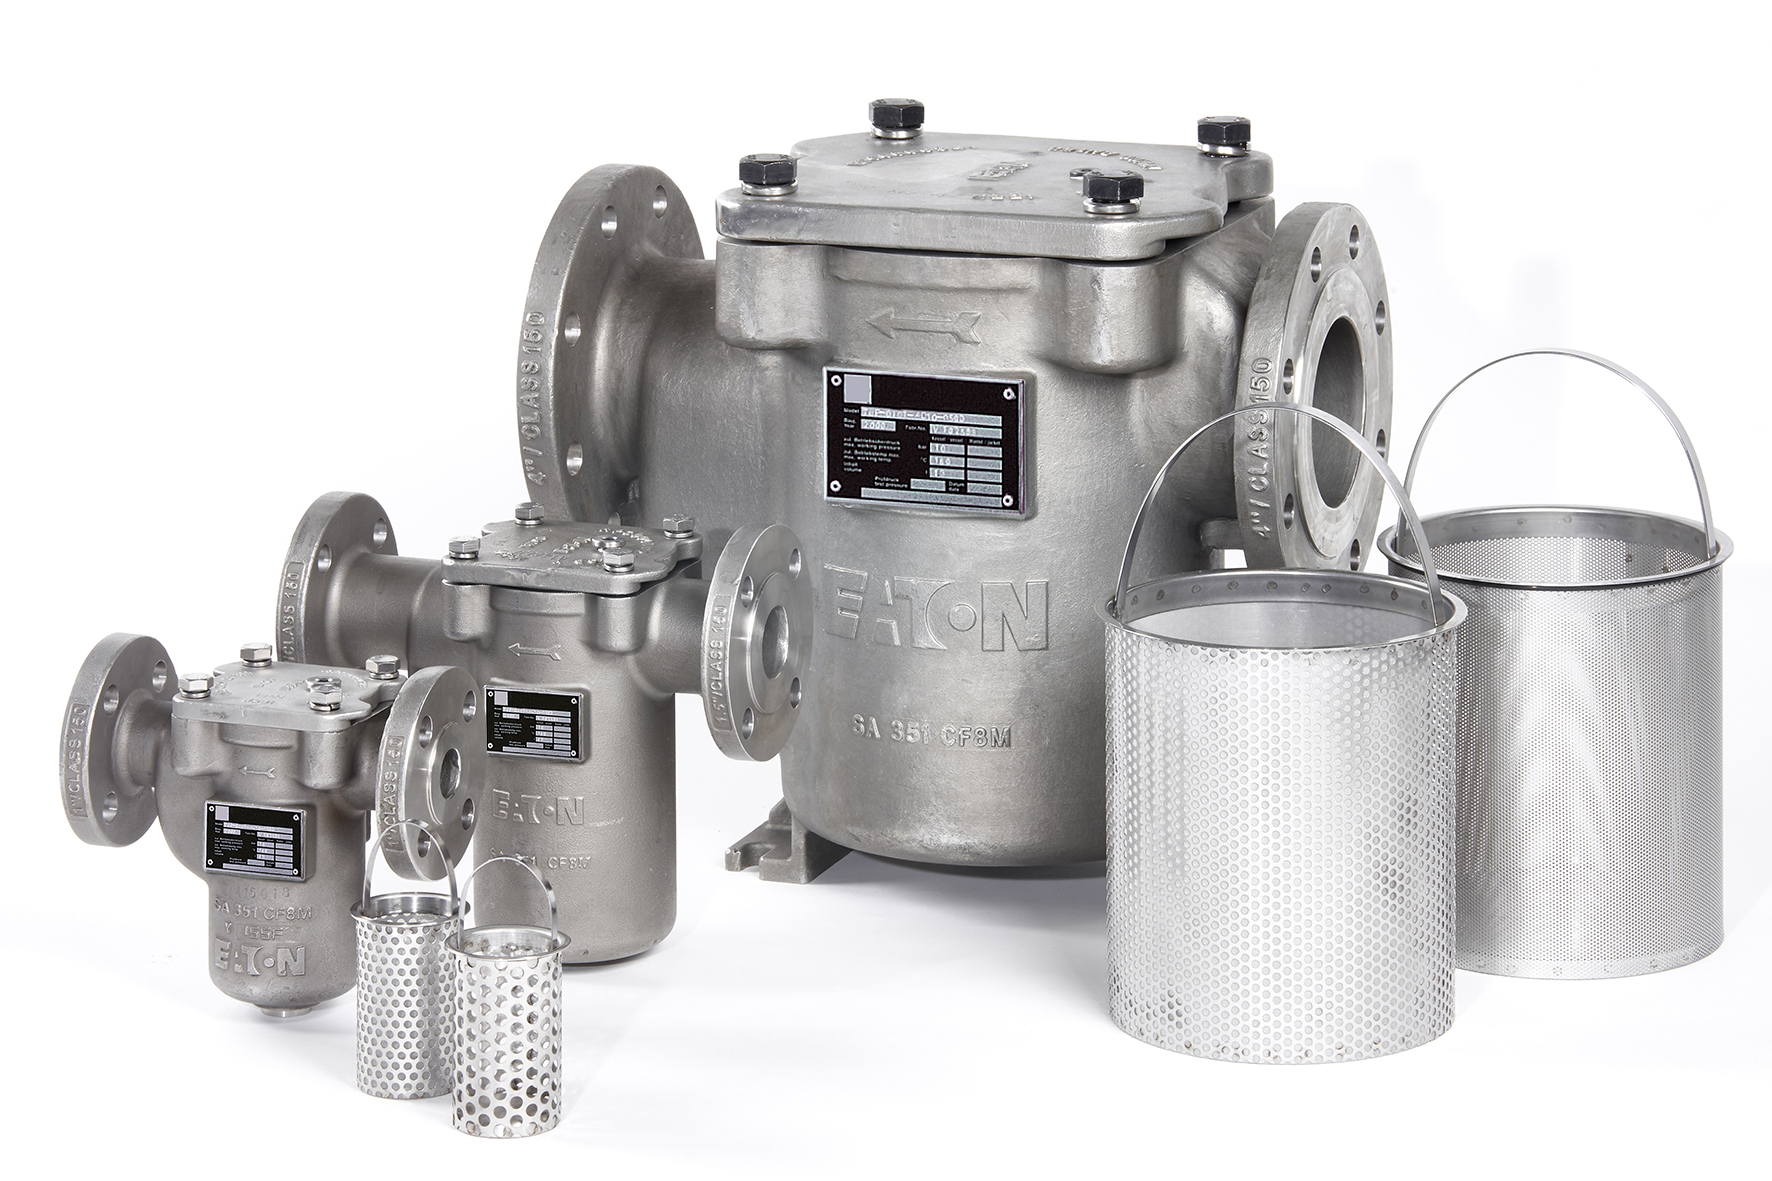 Eaton’s PED-compliant Simplex 72X pipeline basket strainers in ductile iron and stainless steel (CF8M) are designed to protect process equipment in chemical, petrochemical and water applications.